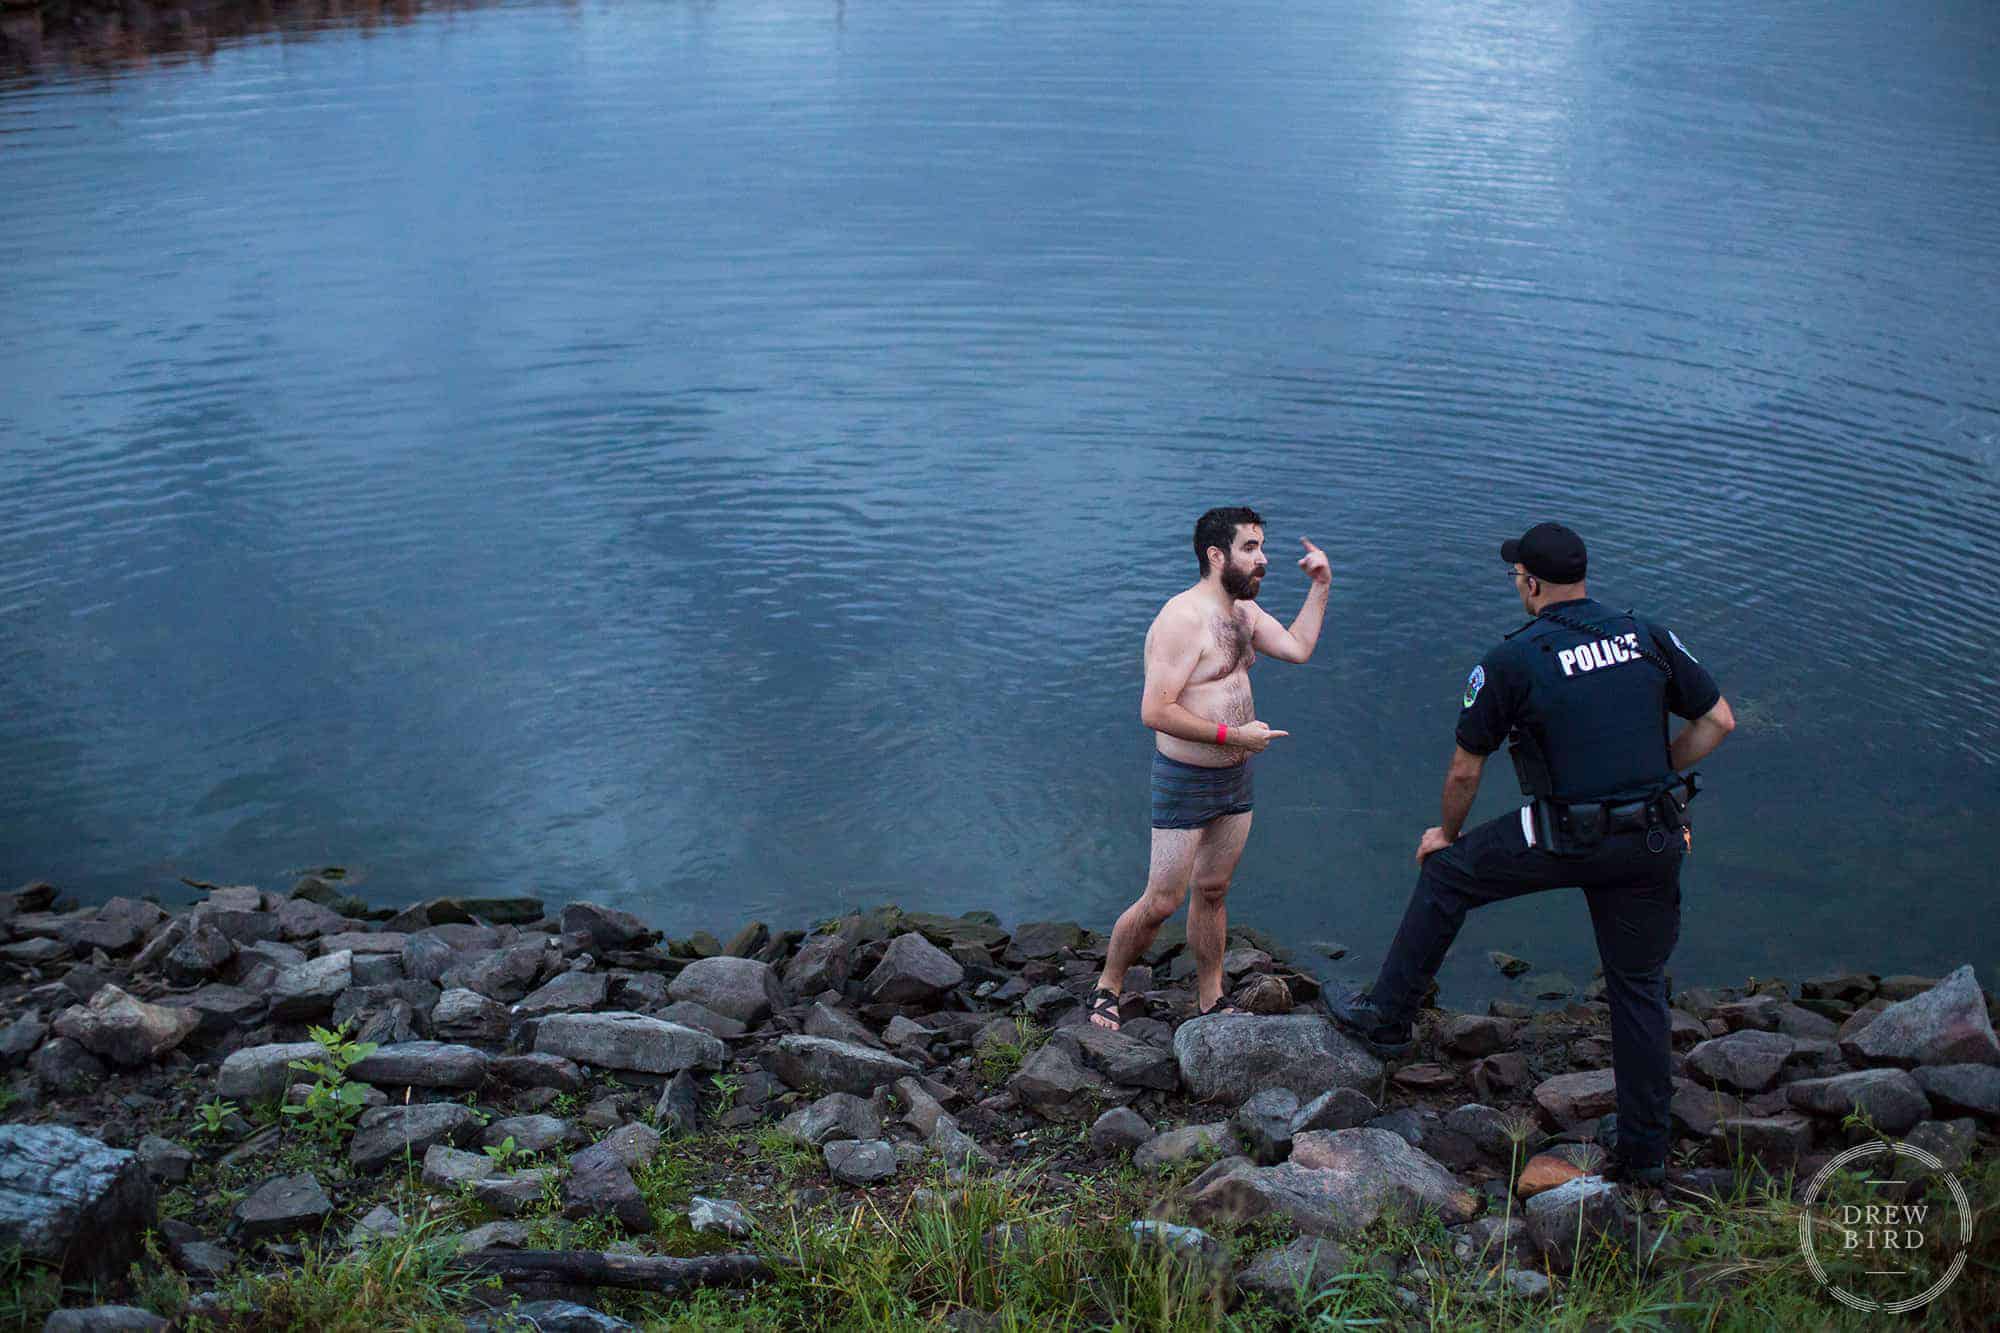 Uniformed police officer talking to a man wearing shorts and sandals next to the water. Editorial photography by Drew Bird Photo, a San Francisco based photographer.